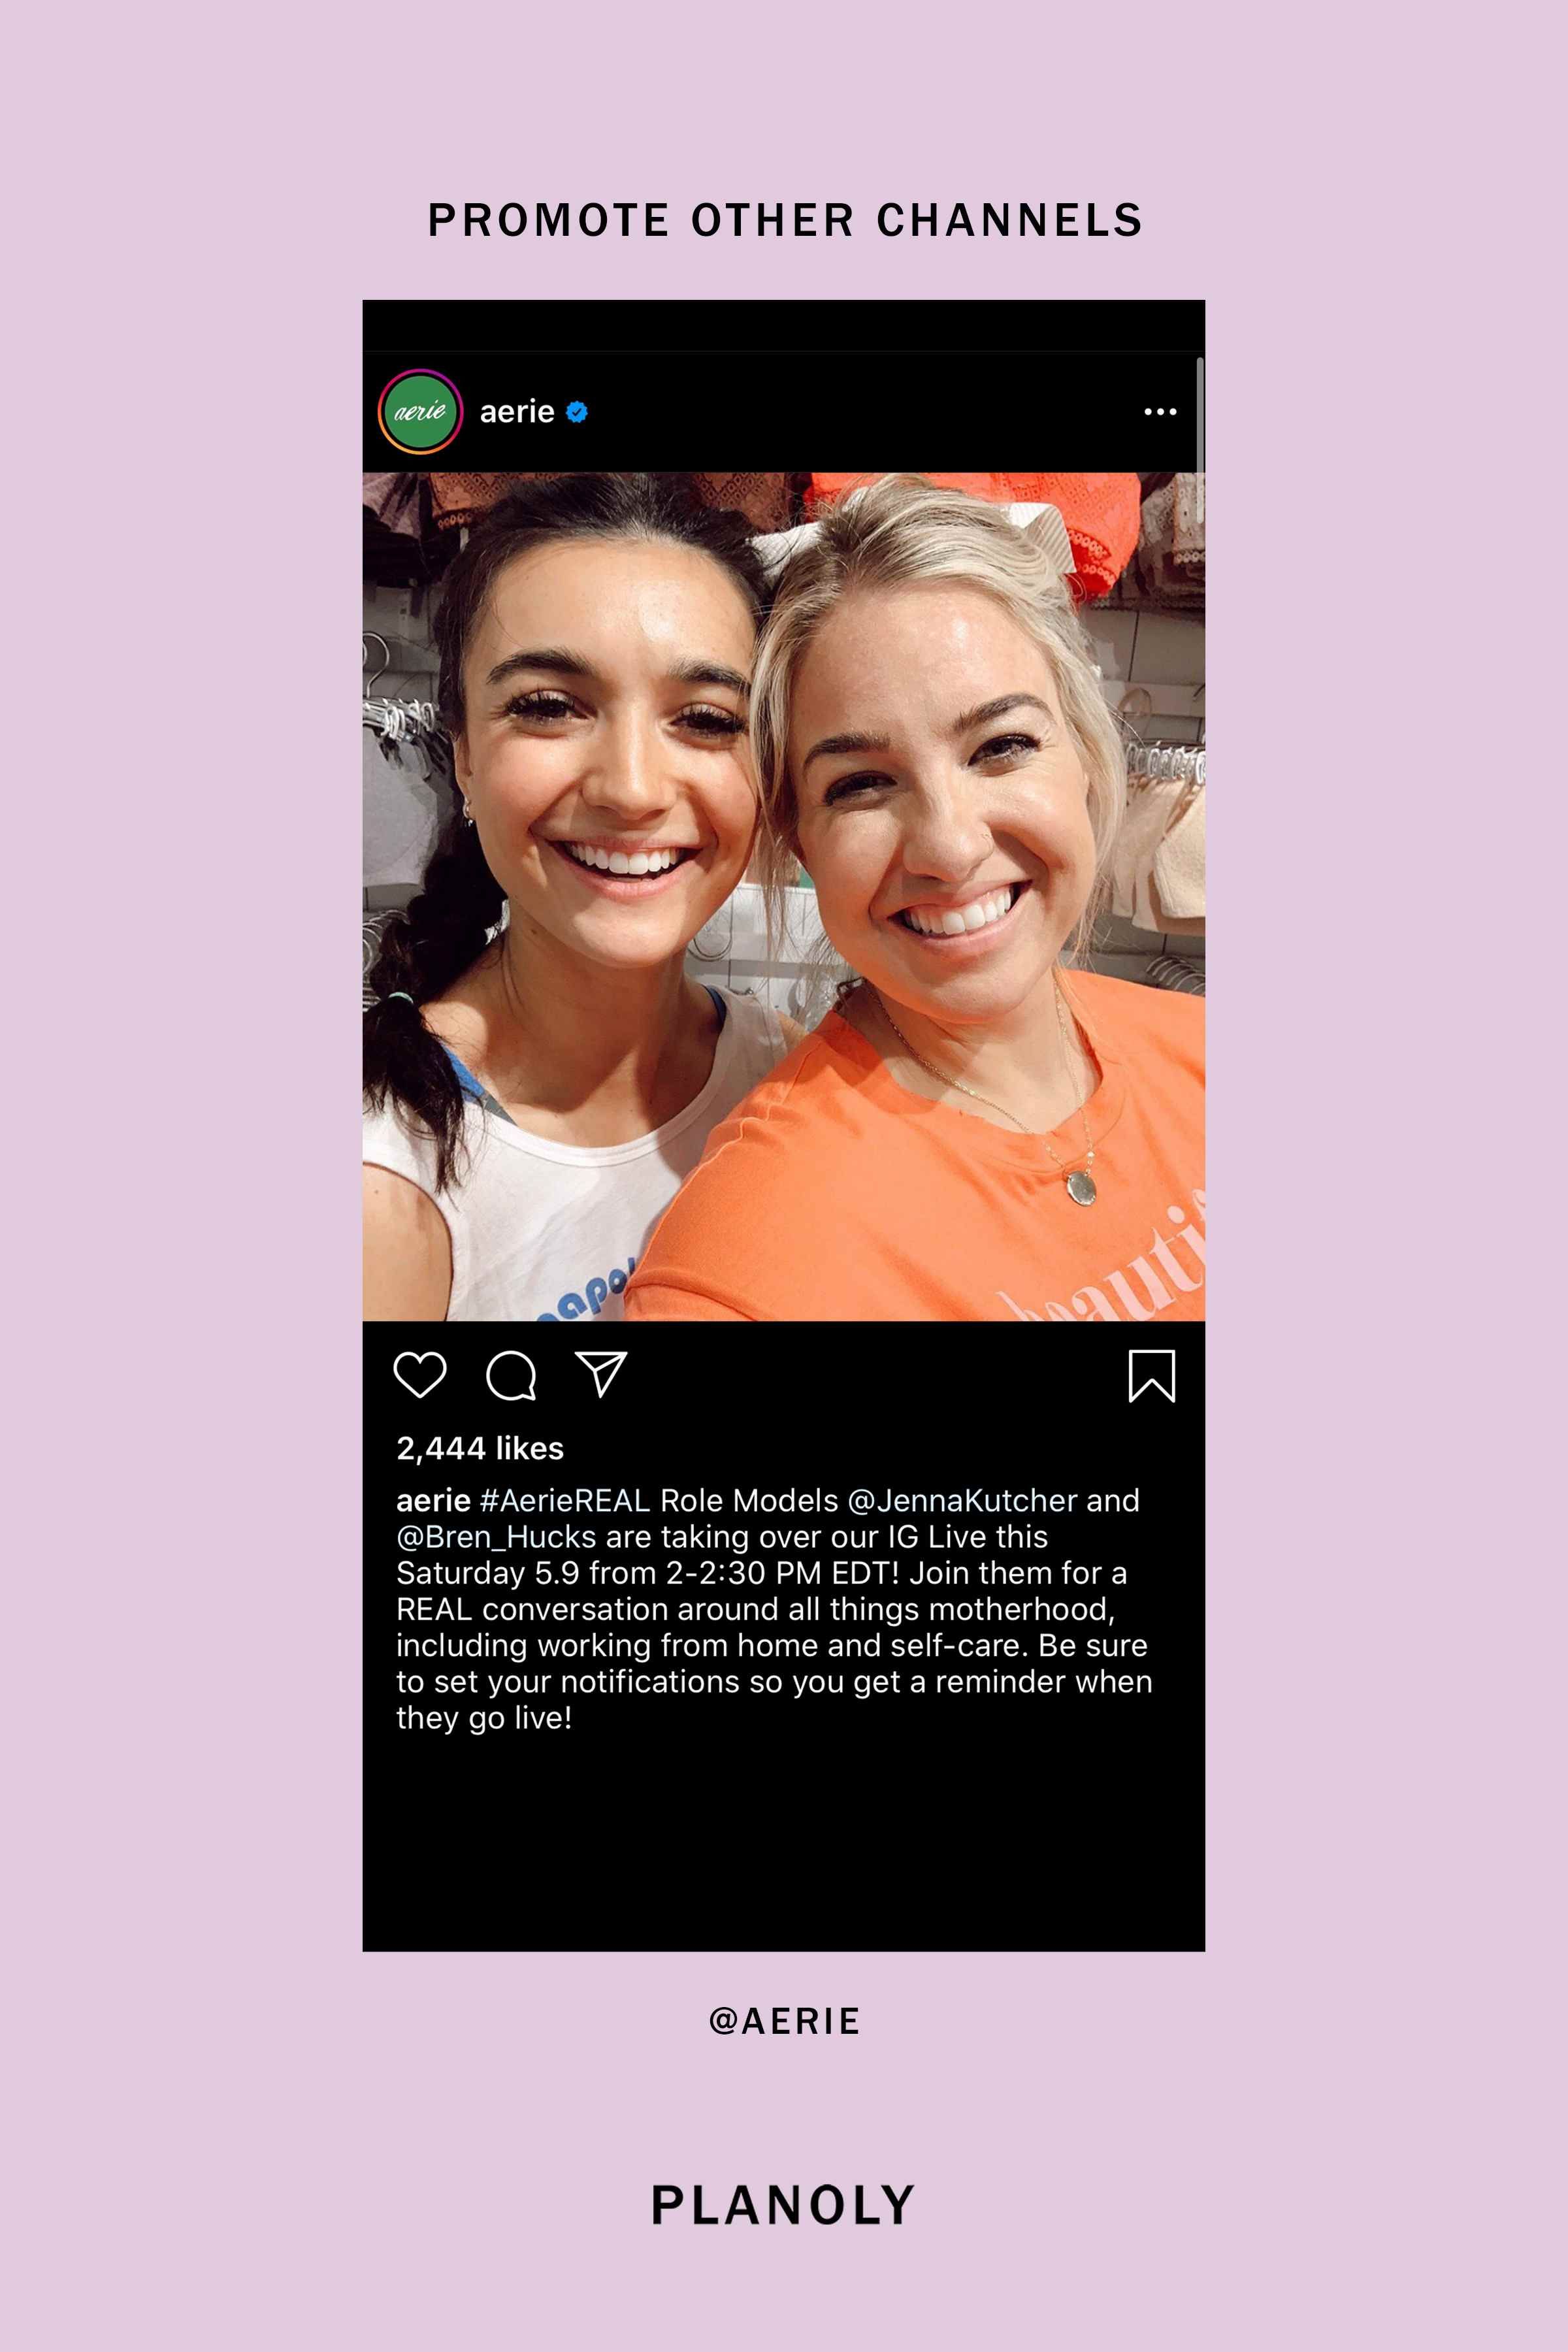 PLANOLY-Blog-Post-The-Ultimate-Guide-to-Writing-Better-Instagram-Captions-Image-6